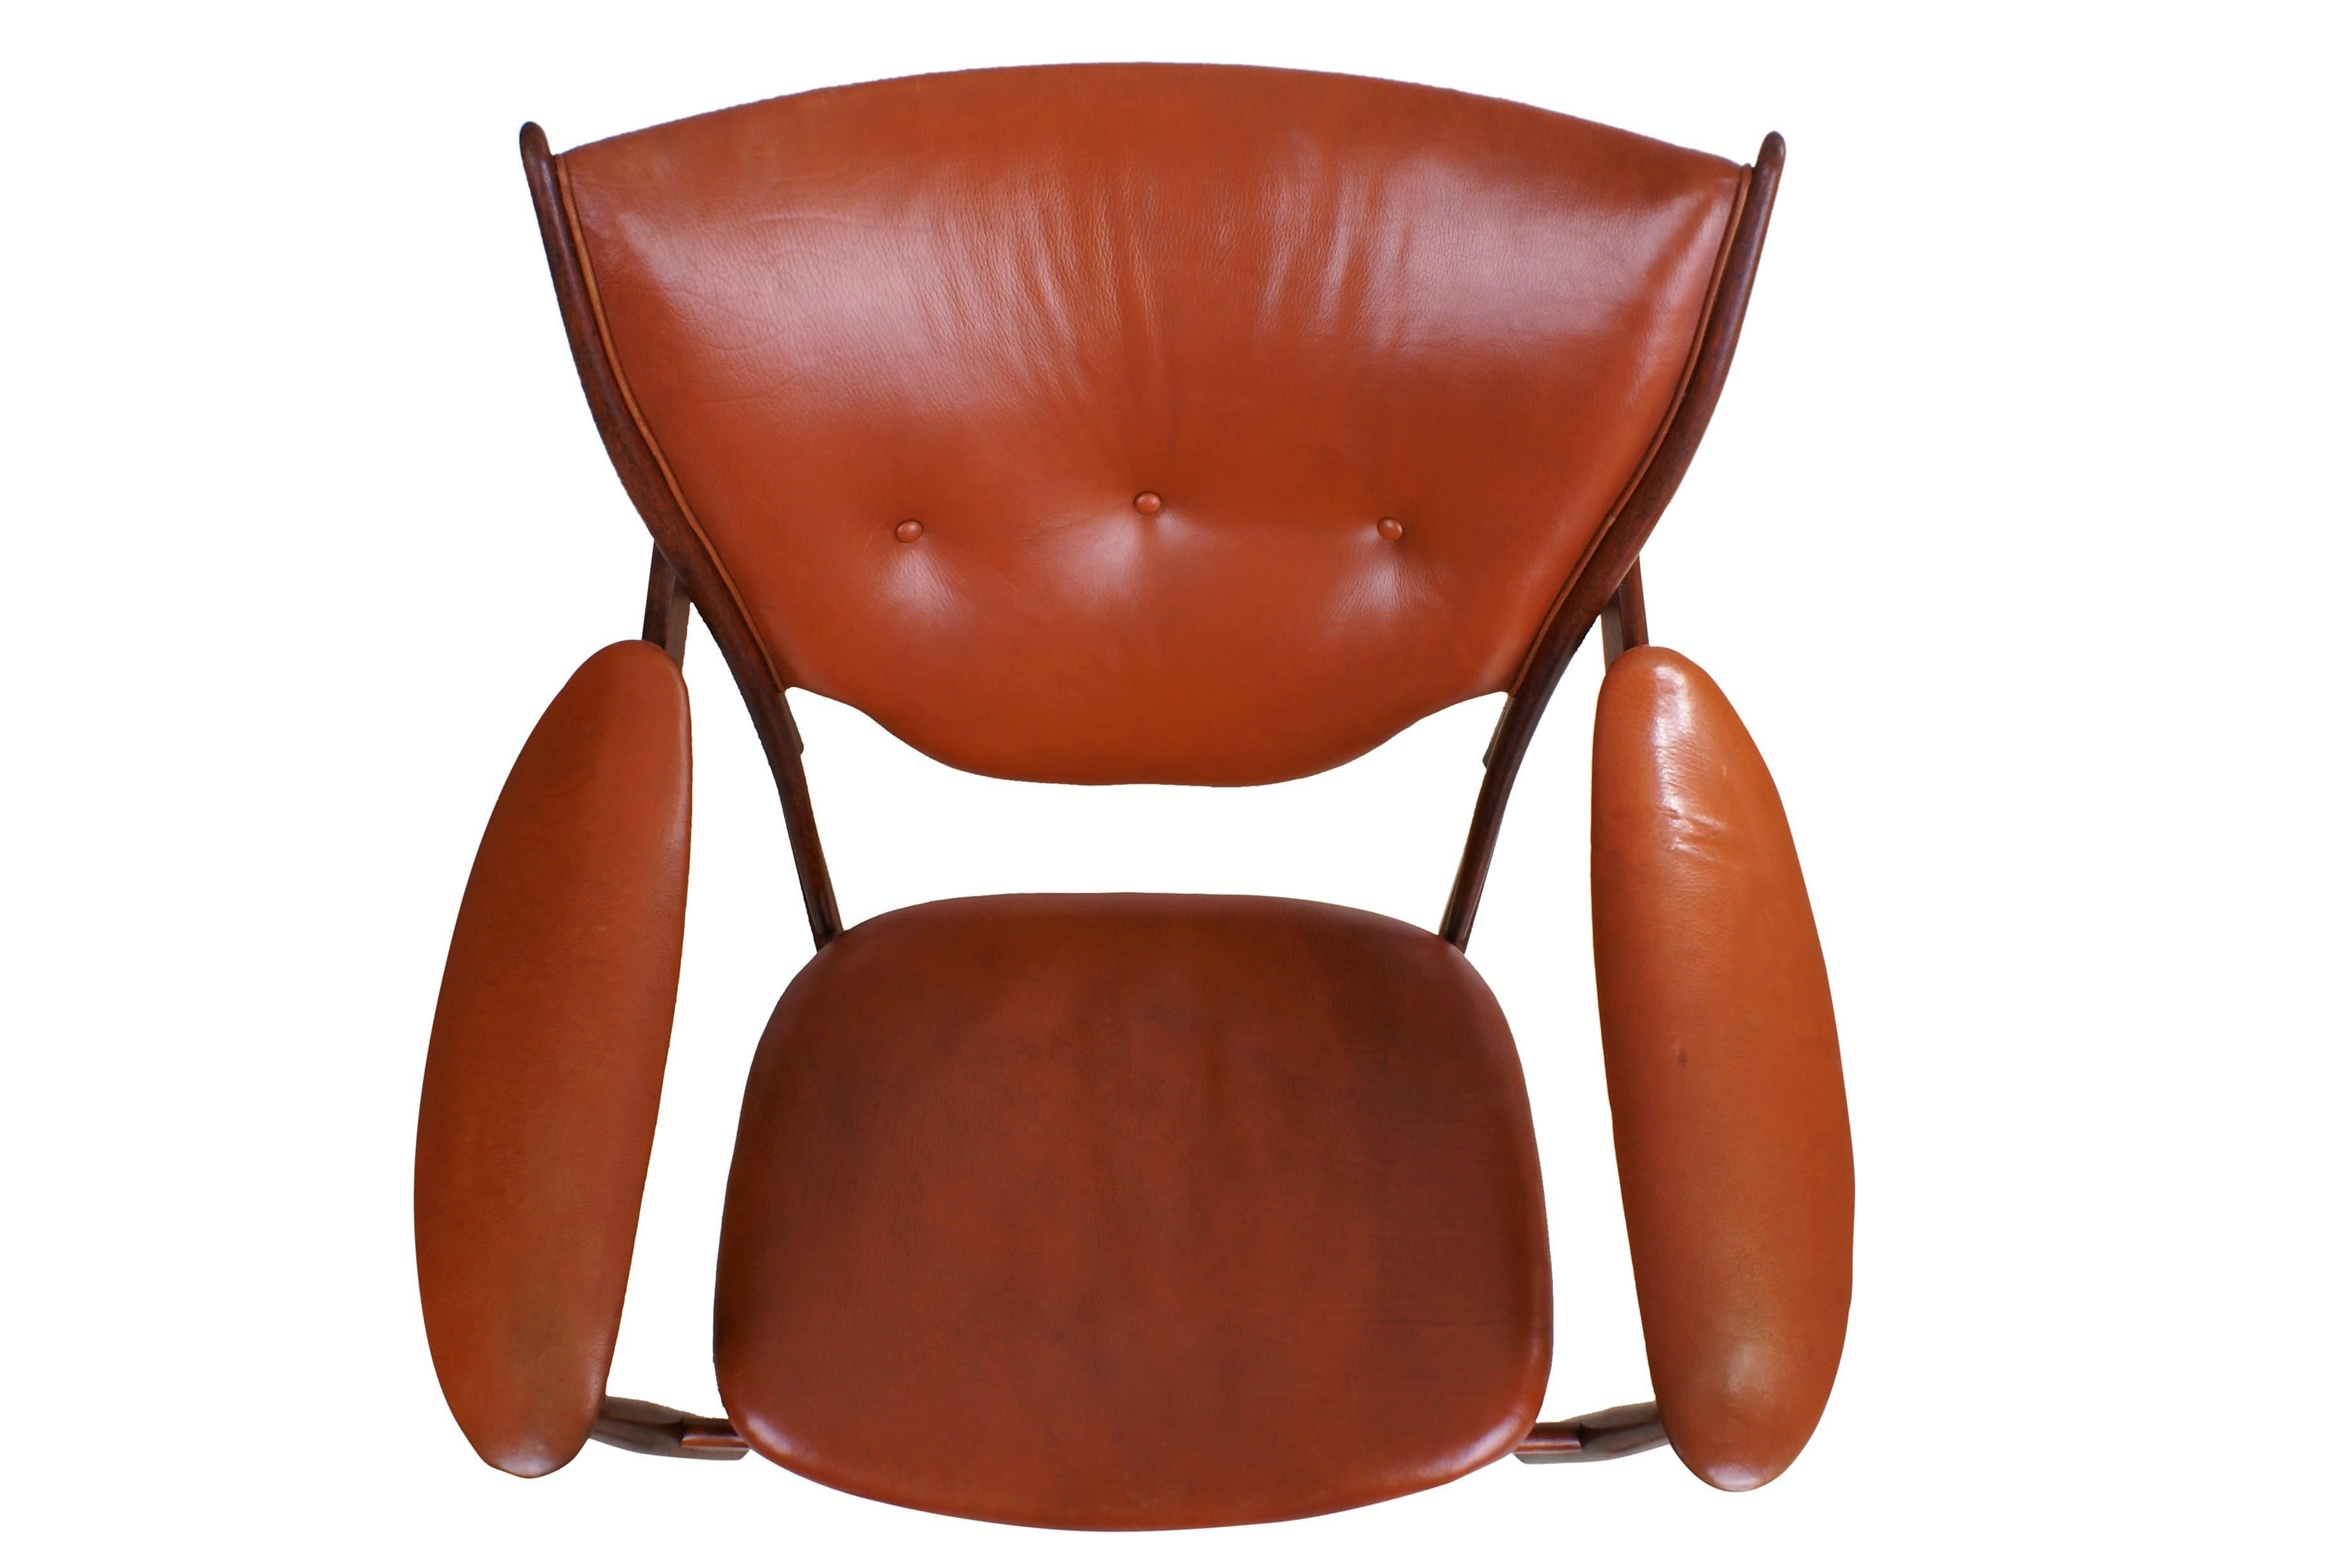 Finn Juhl Rare 'Chieftain' Chair in Teak and Leather for Niels Vodder, 1949 In Excellent Condition For Sale In Copenhagen, DK